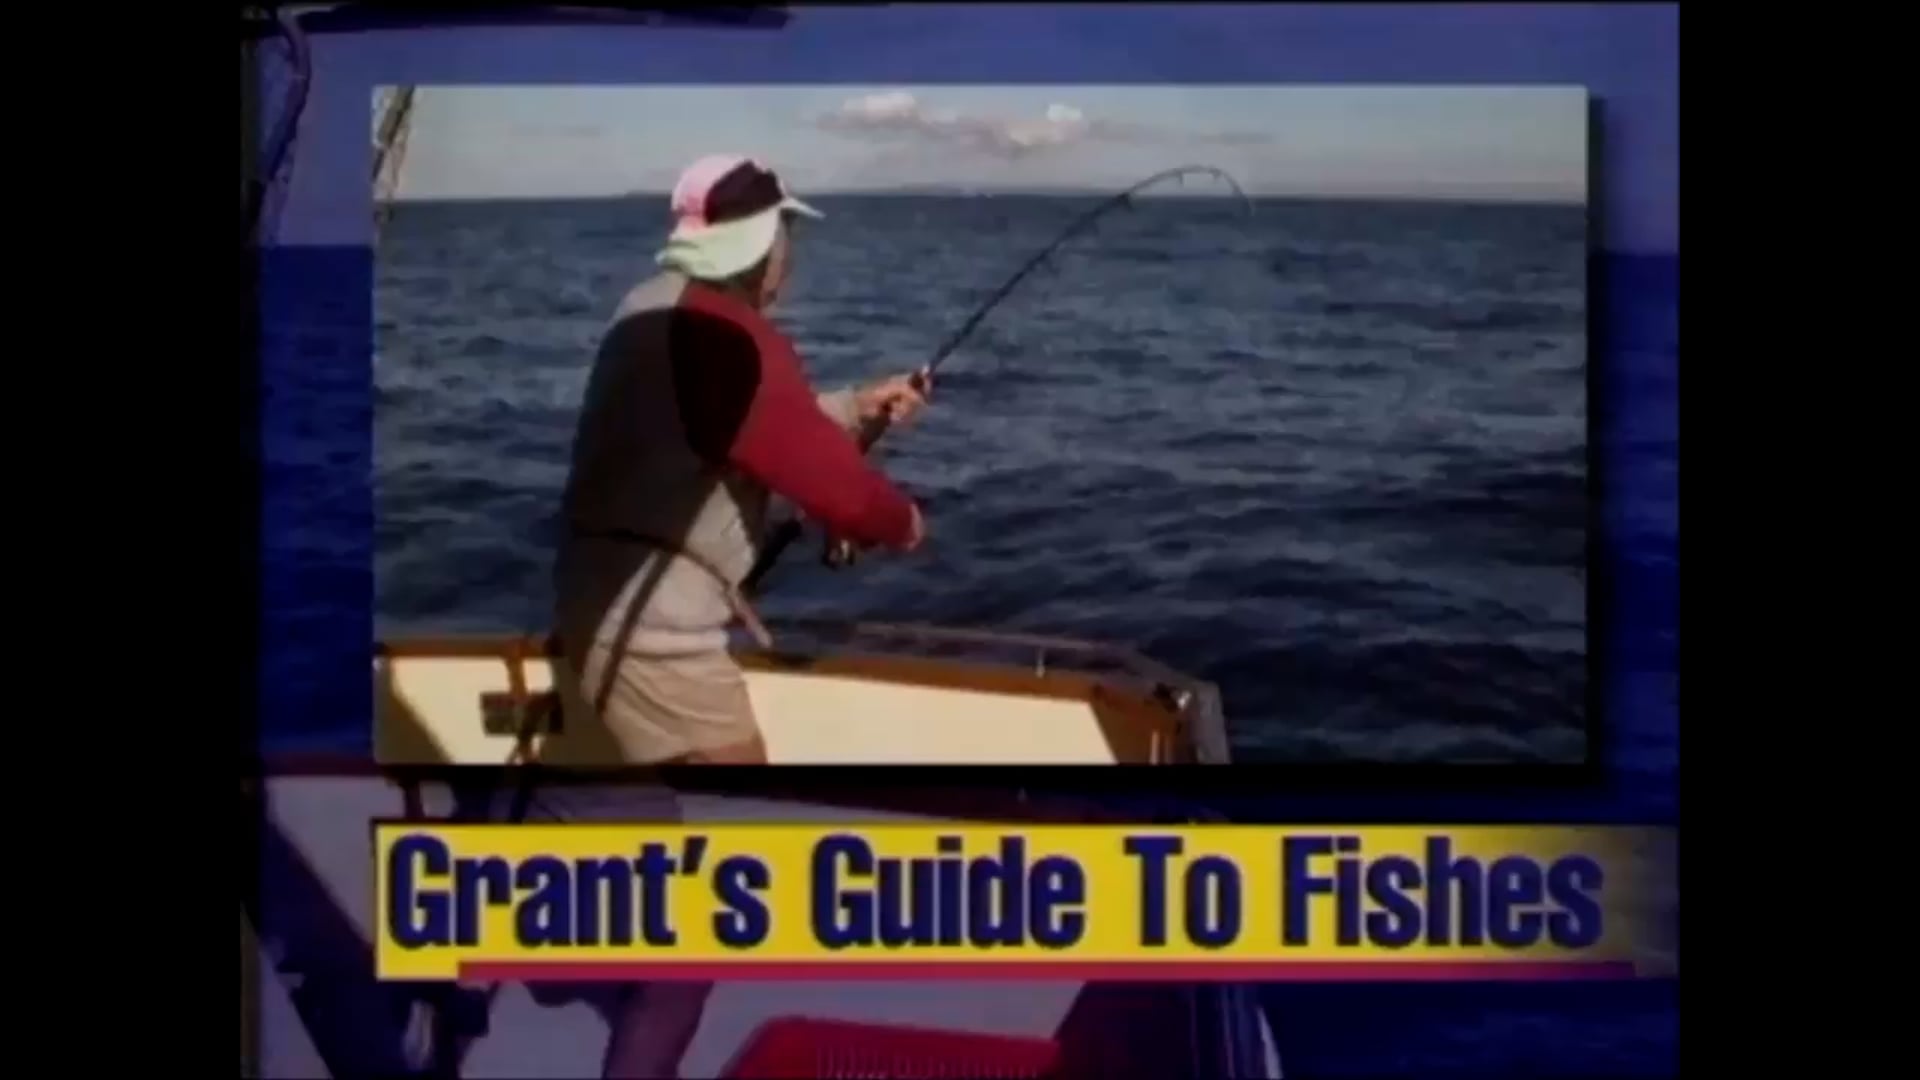 Grant’s Guide to Fishes – June 1995